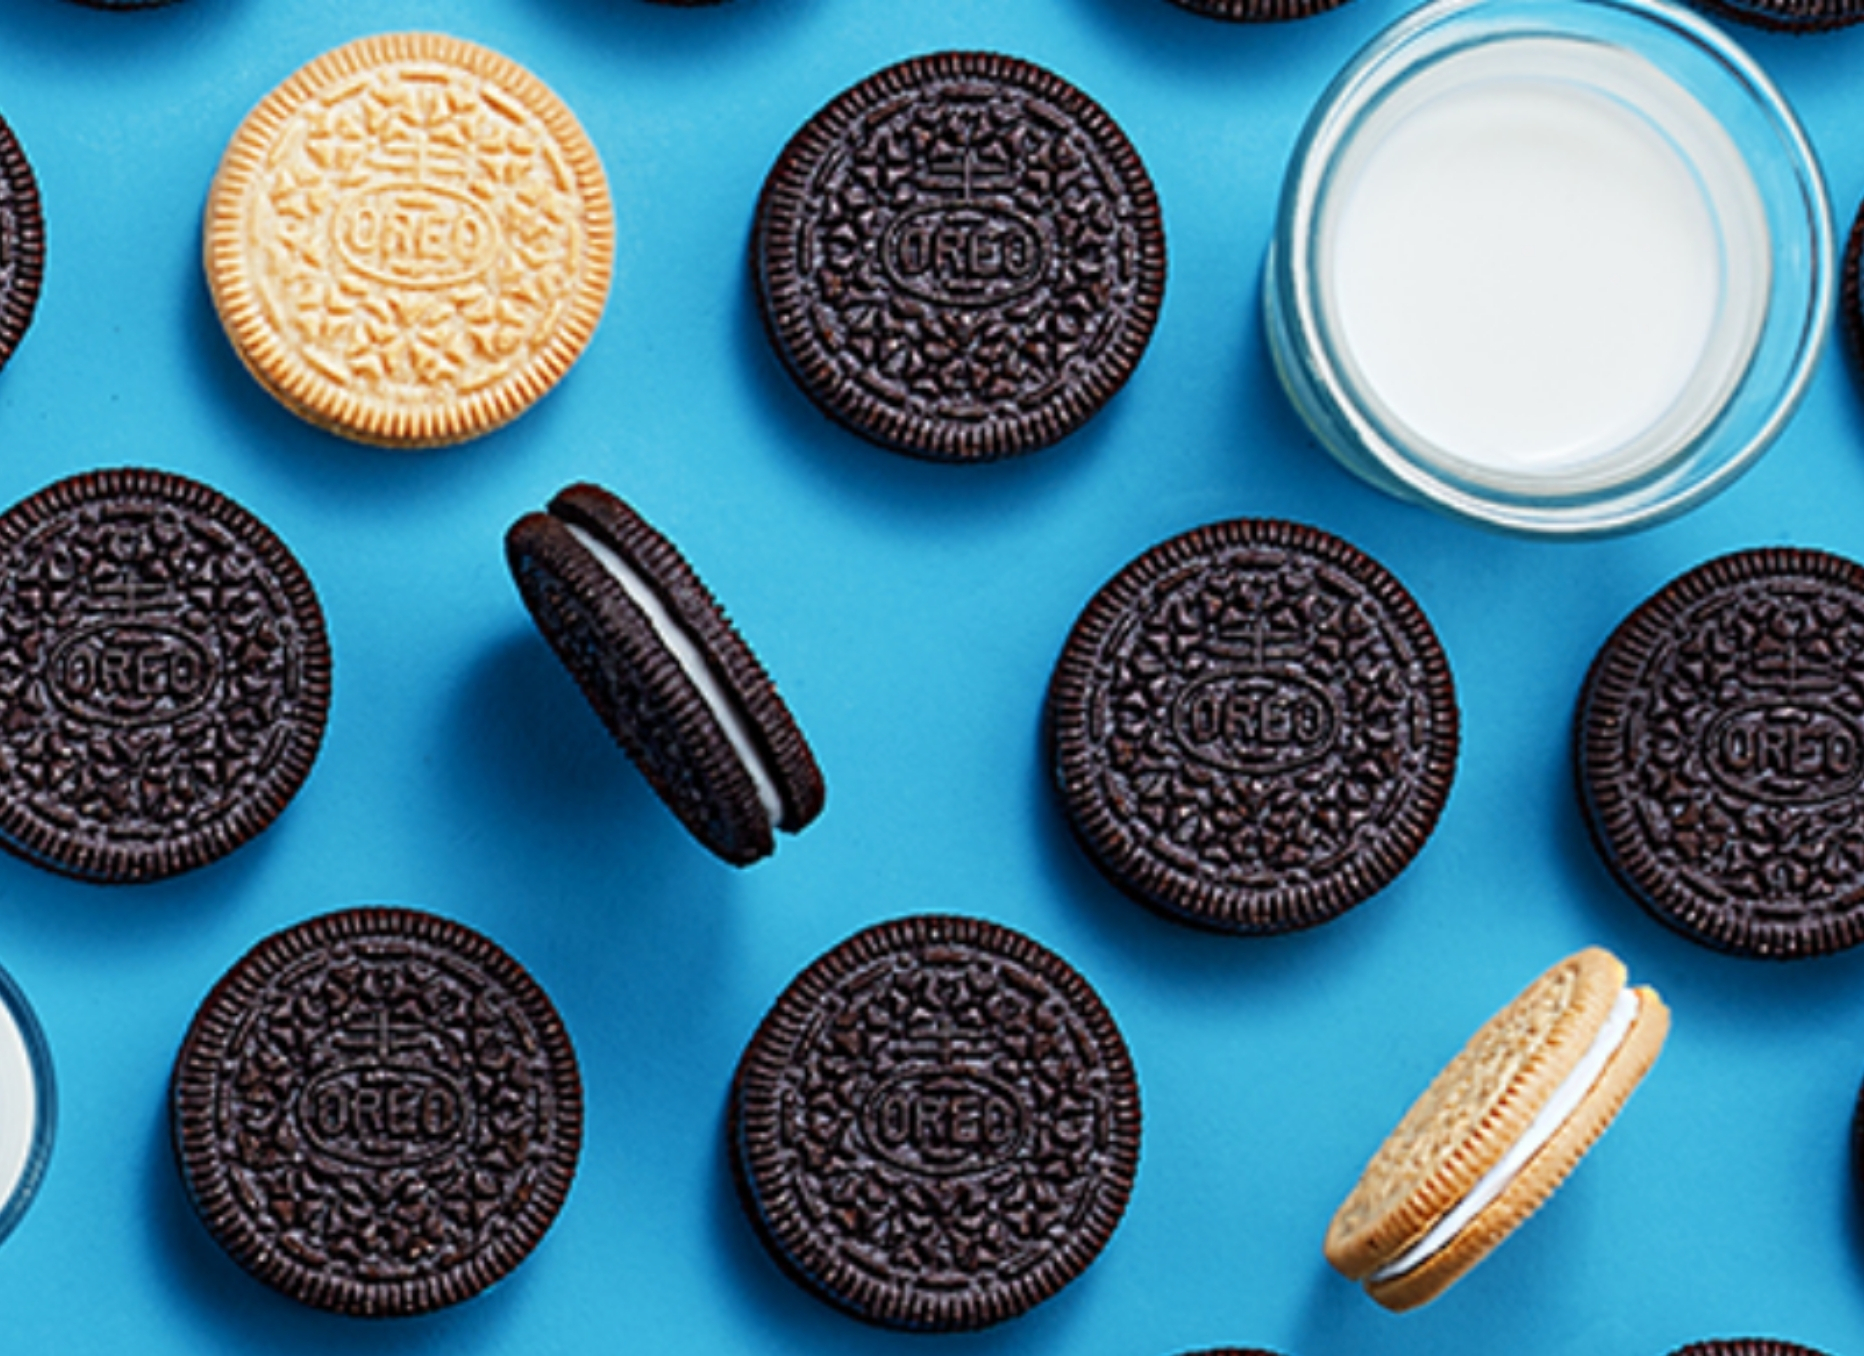 different types of oreos